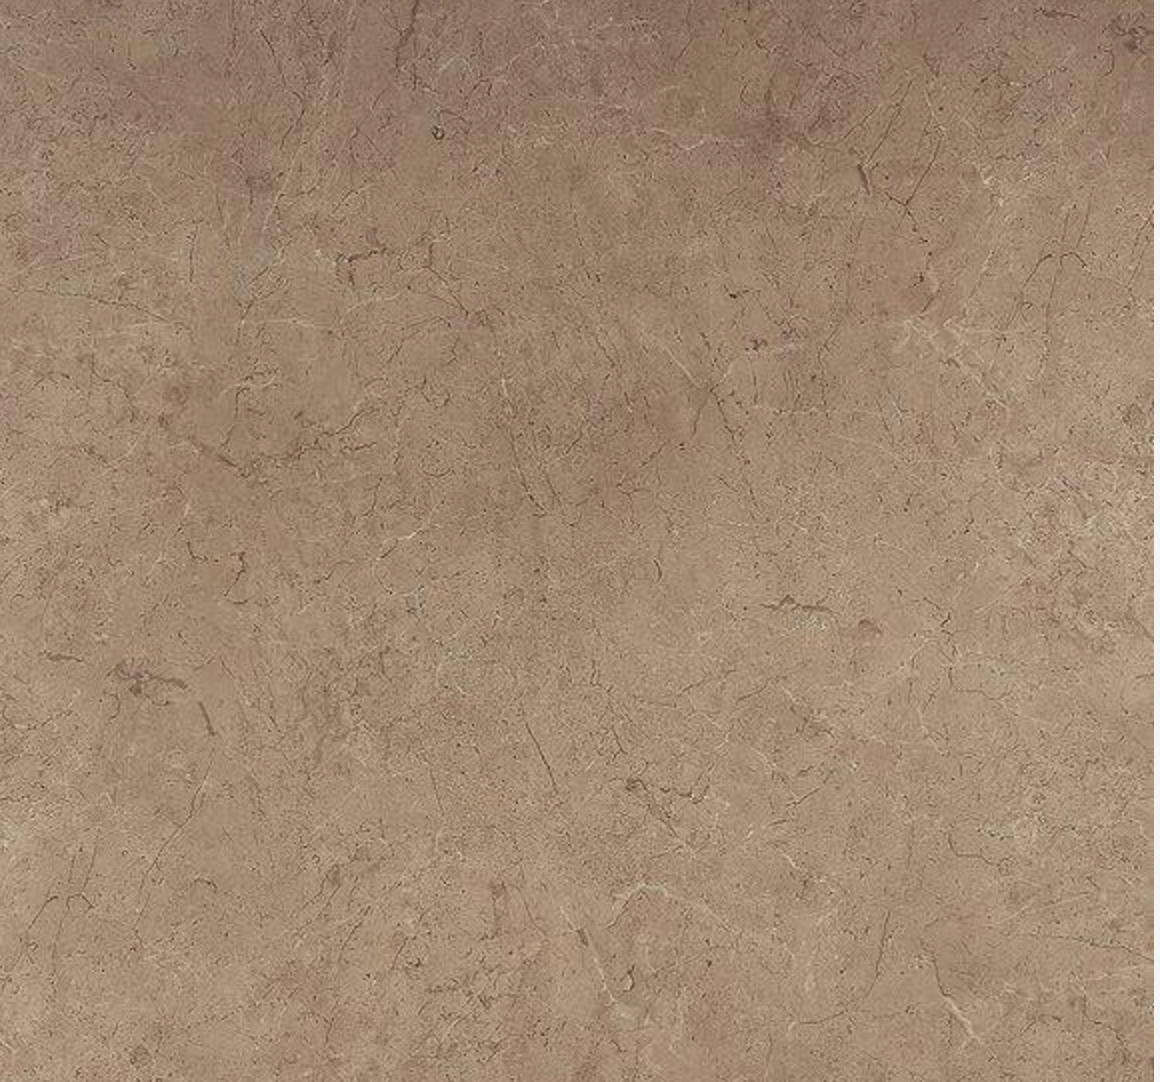 Showerwall Laminate Marble Collection - Cappuccino Marble